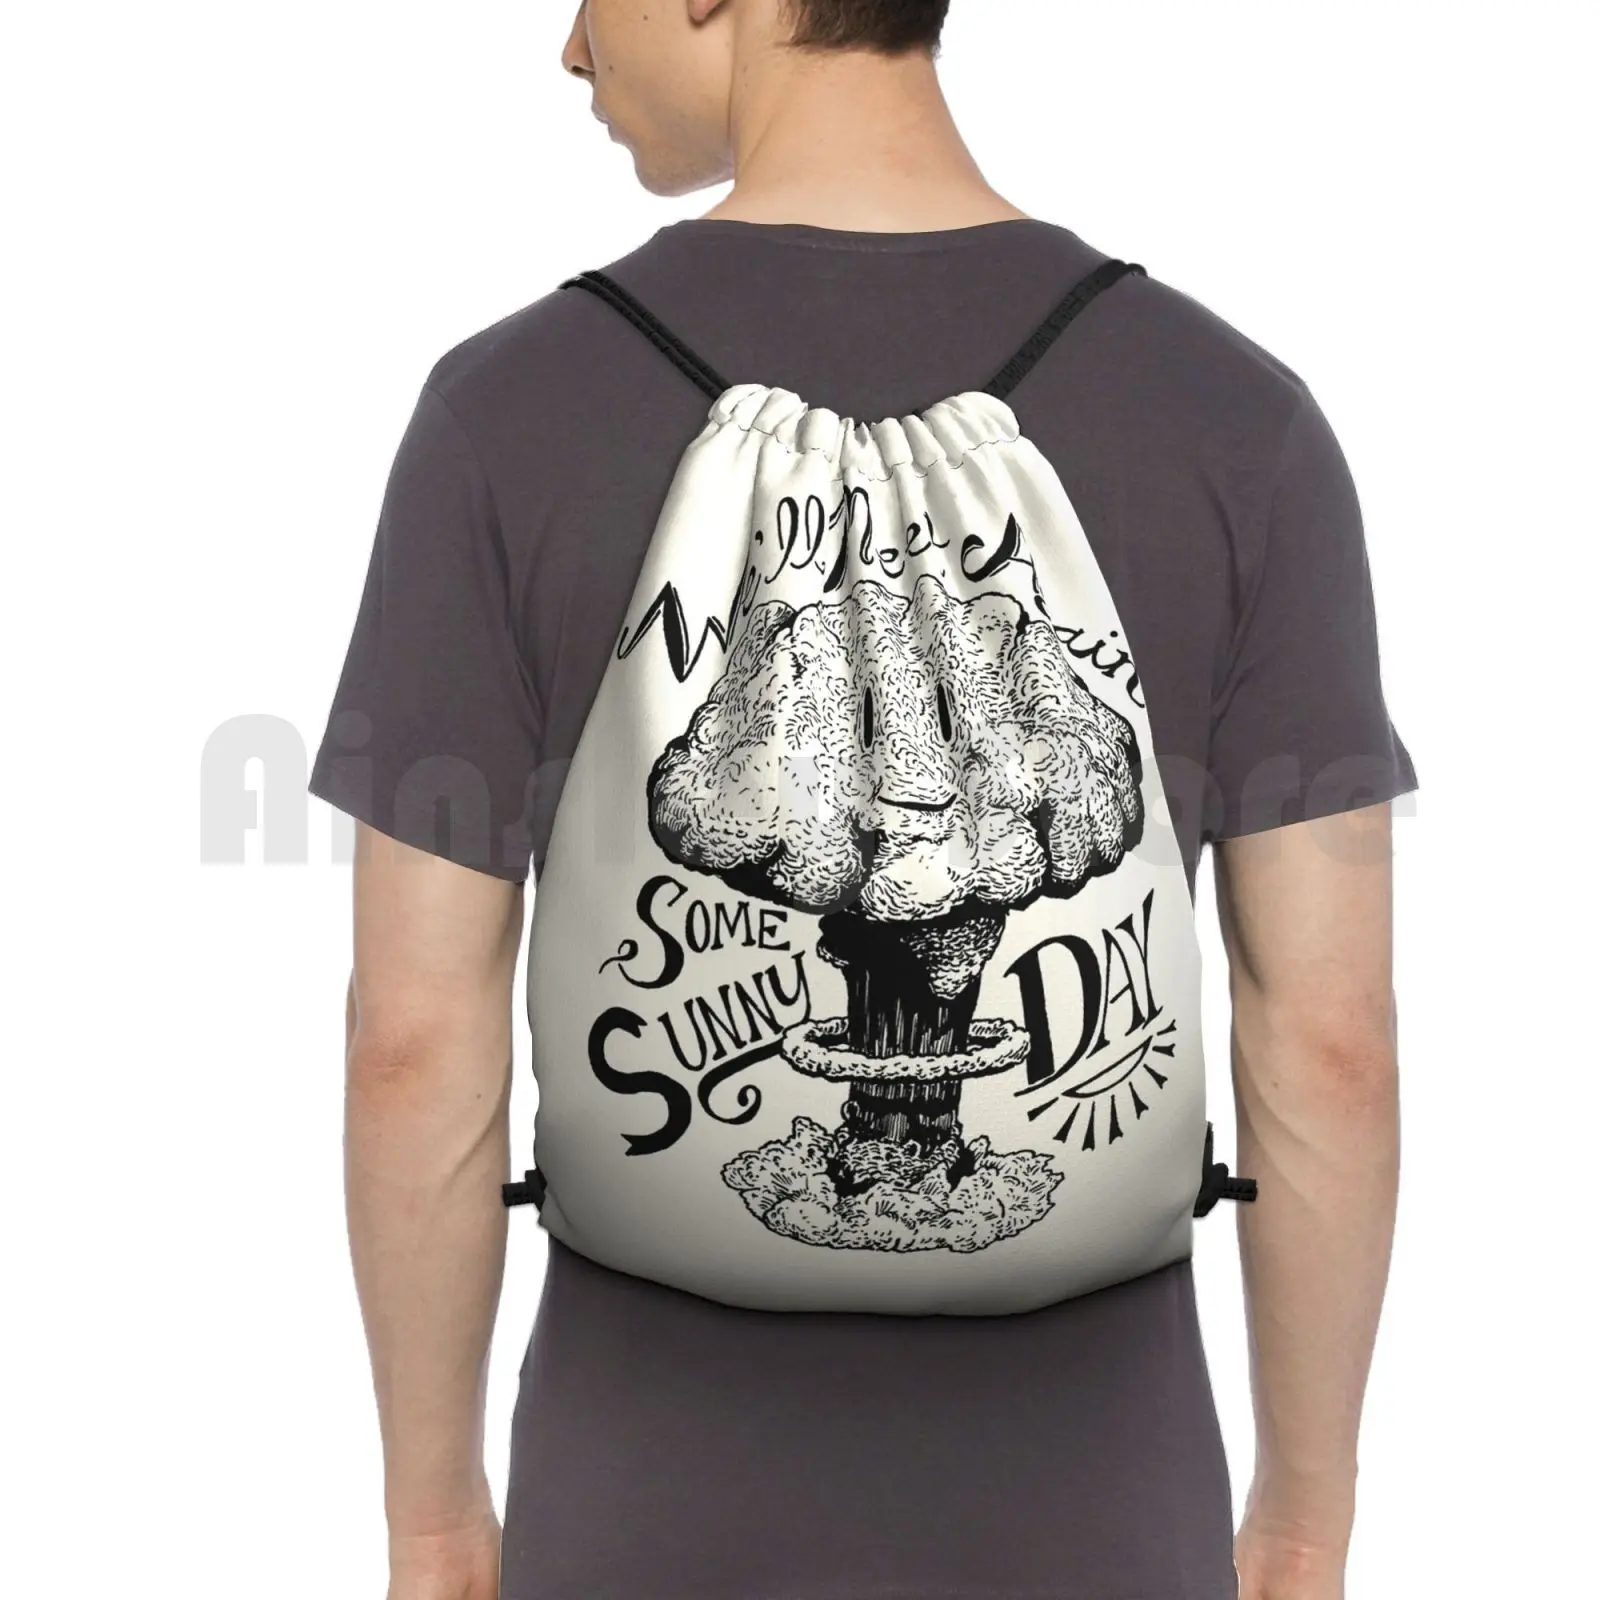 

We'Ll Meet Again Some Sunny Day Backpack Drawstring Bag Riding Climbing Gym Bag Movies Fan Art Dr Strangelove Stanley